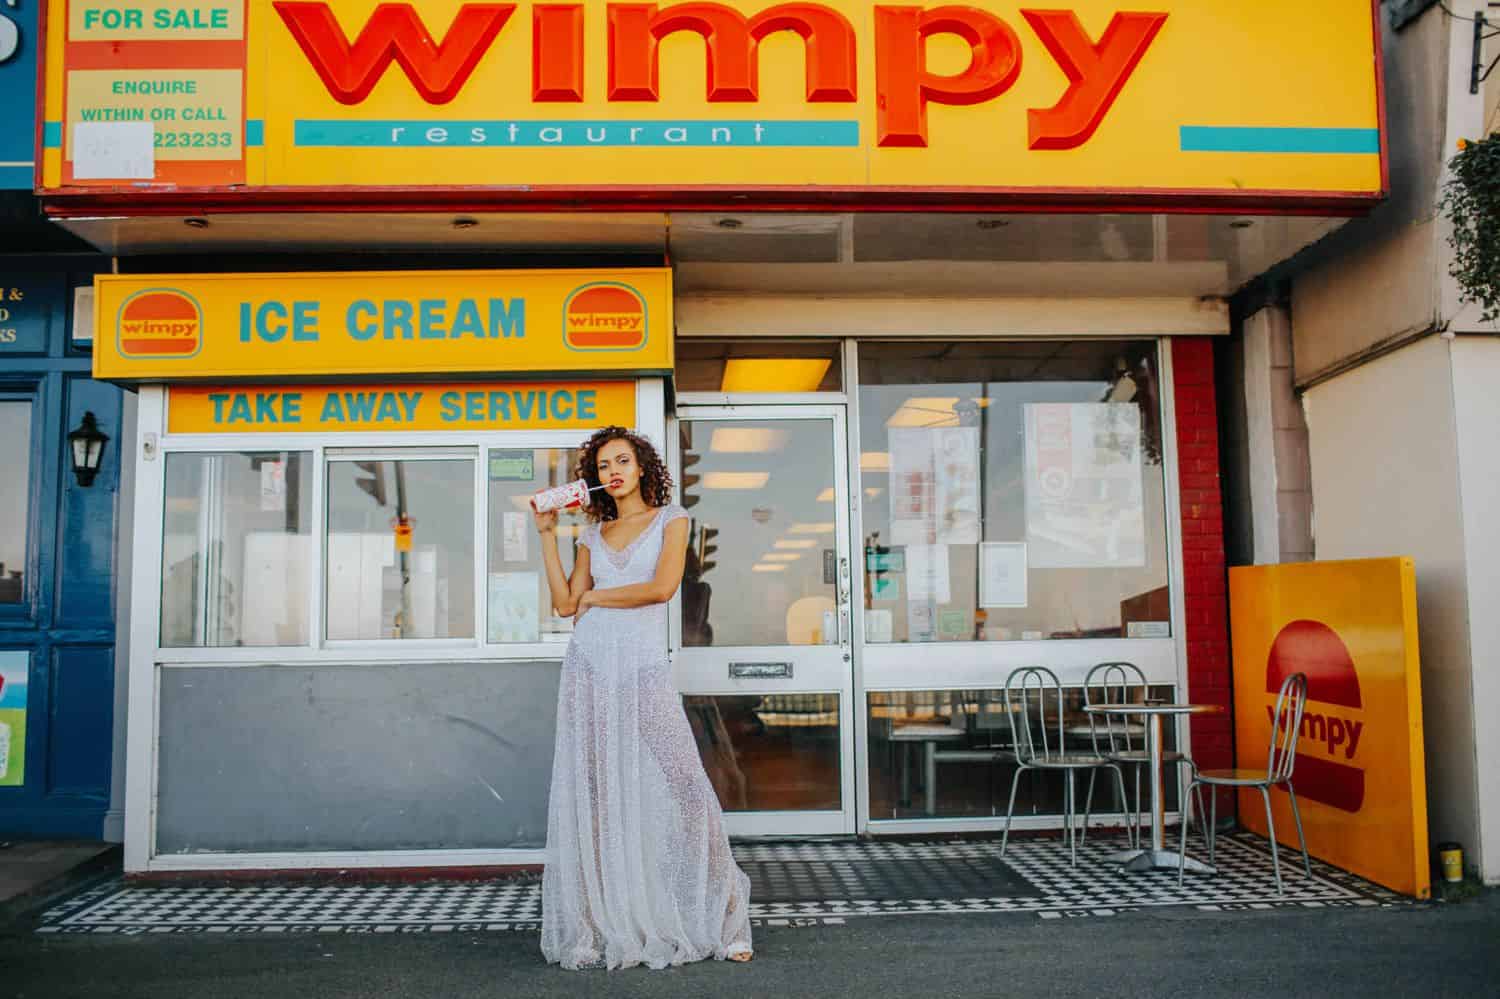 How To Make A Photography Website Your Dream Clients Can’t Resist: A woman in a sheer, glittery dress sips a milkshake in front of a takeaway counter.